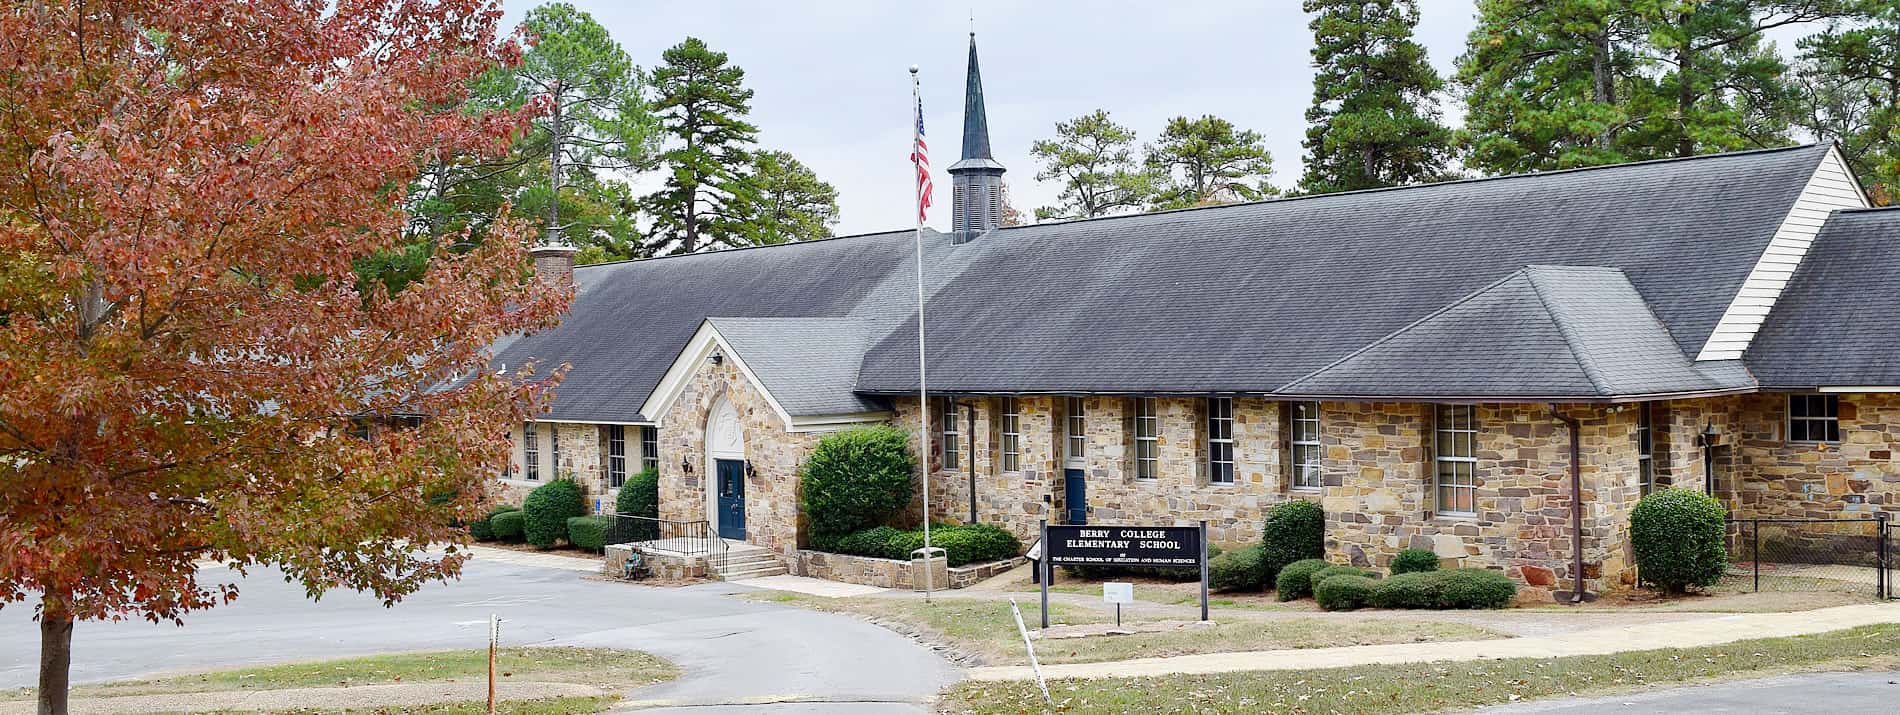 Berry College Elementary Middle  School